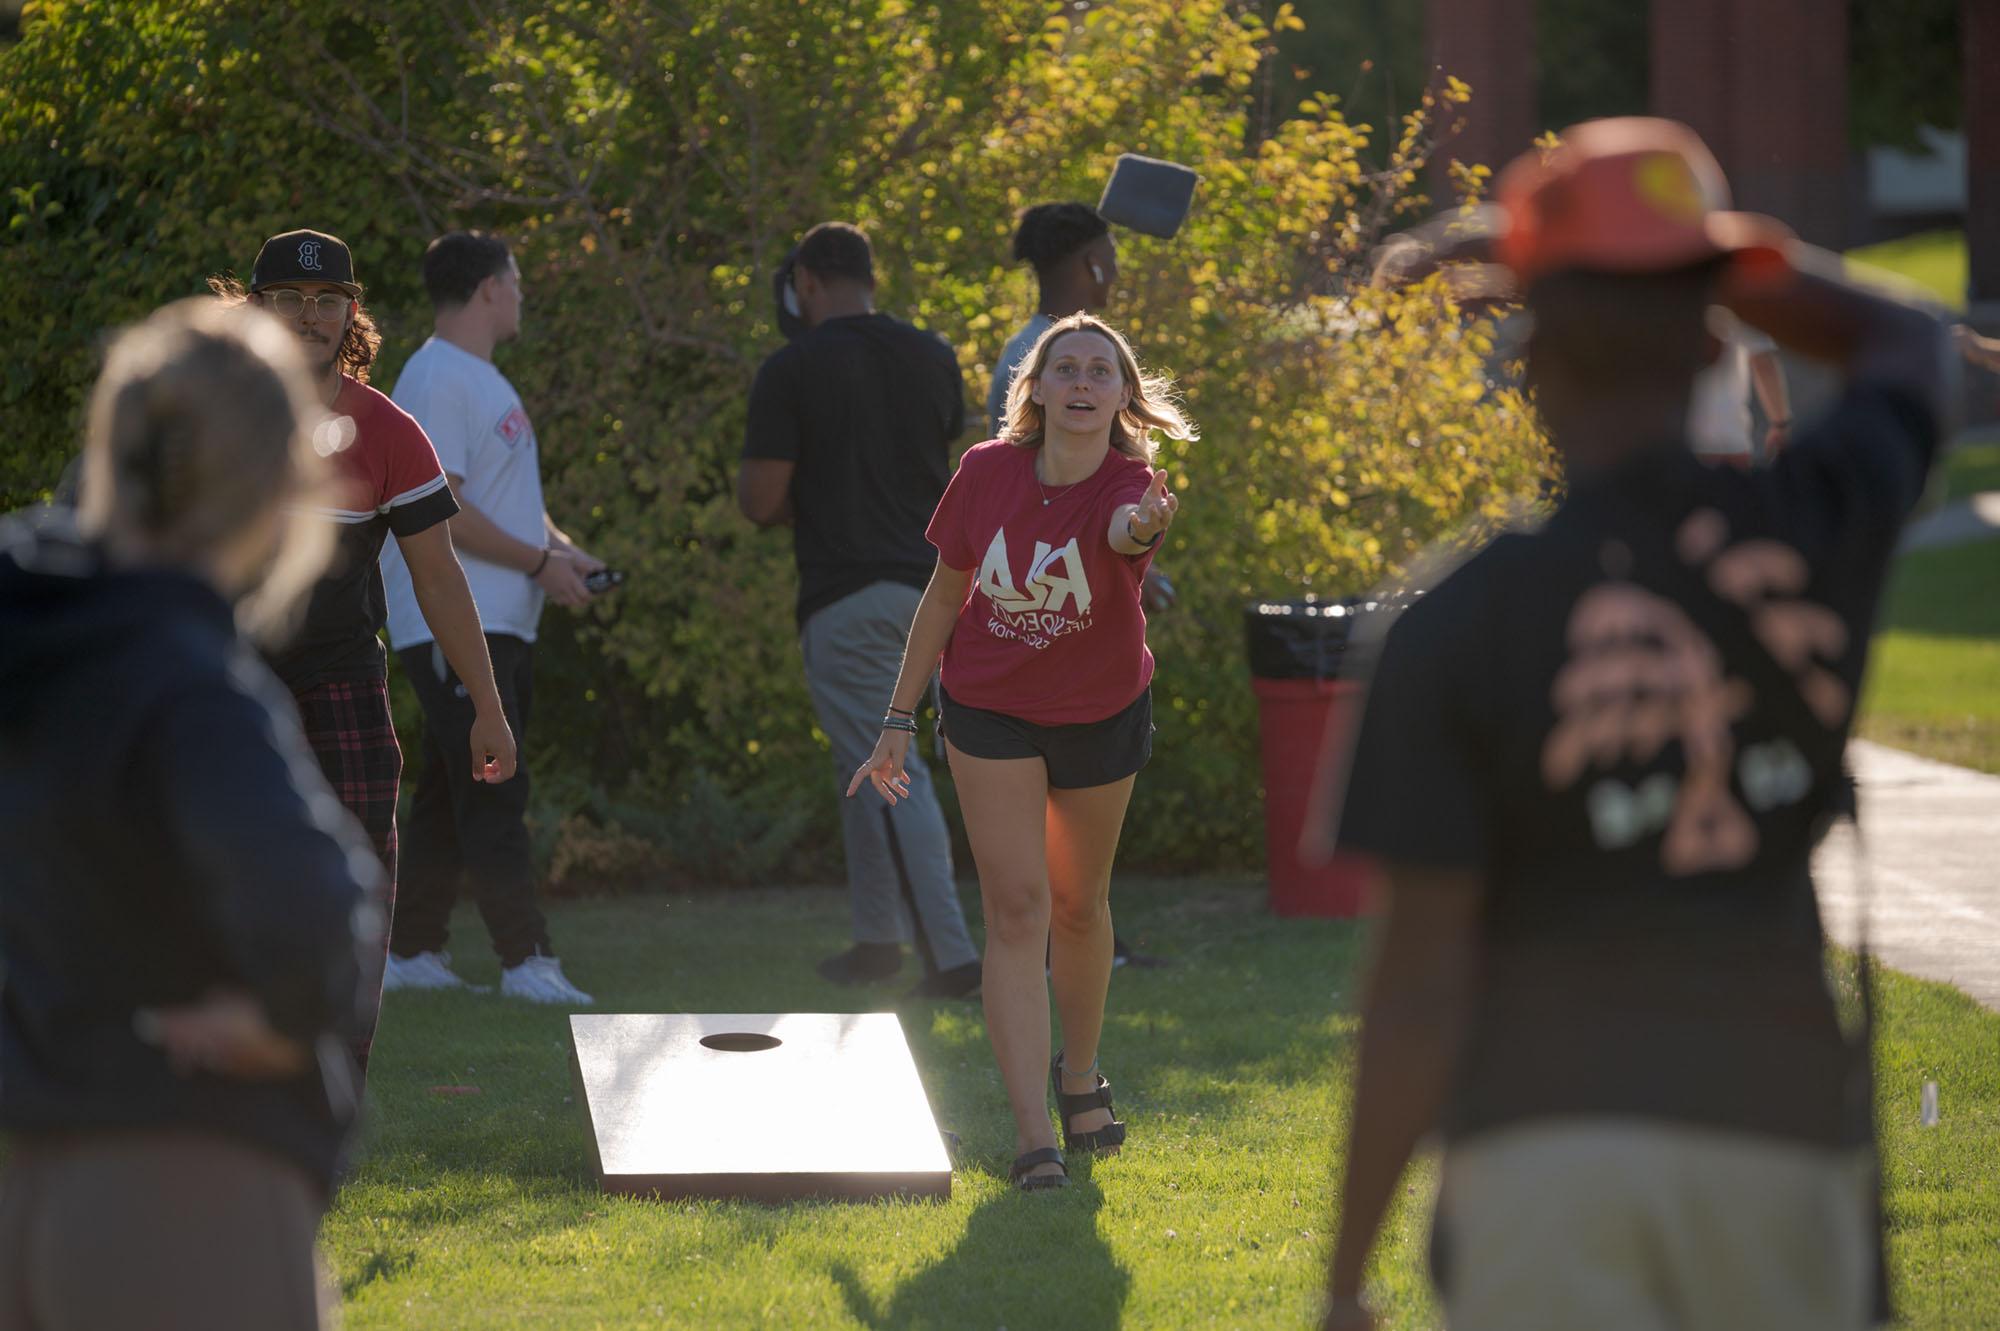 Students playing a bean bag toss